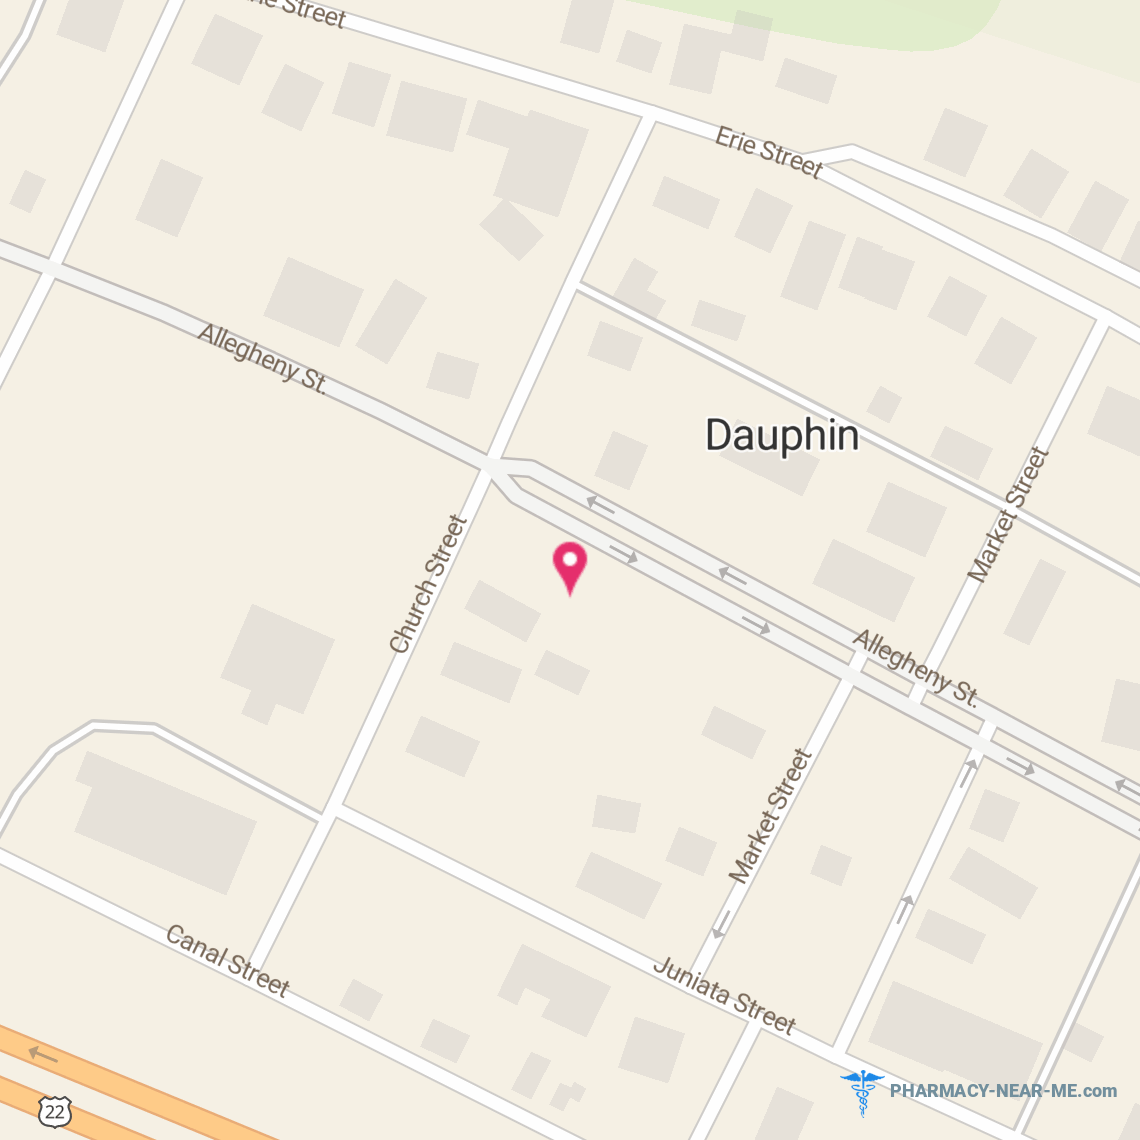 DAUPHIN PROFESSIONAL PHARMACY INC - Pharmacy Hours, Phone, Reviews & Information: 722 Allegheny Street, Dauphin, Pennsylvania 17018, United States